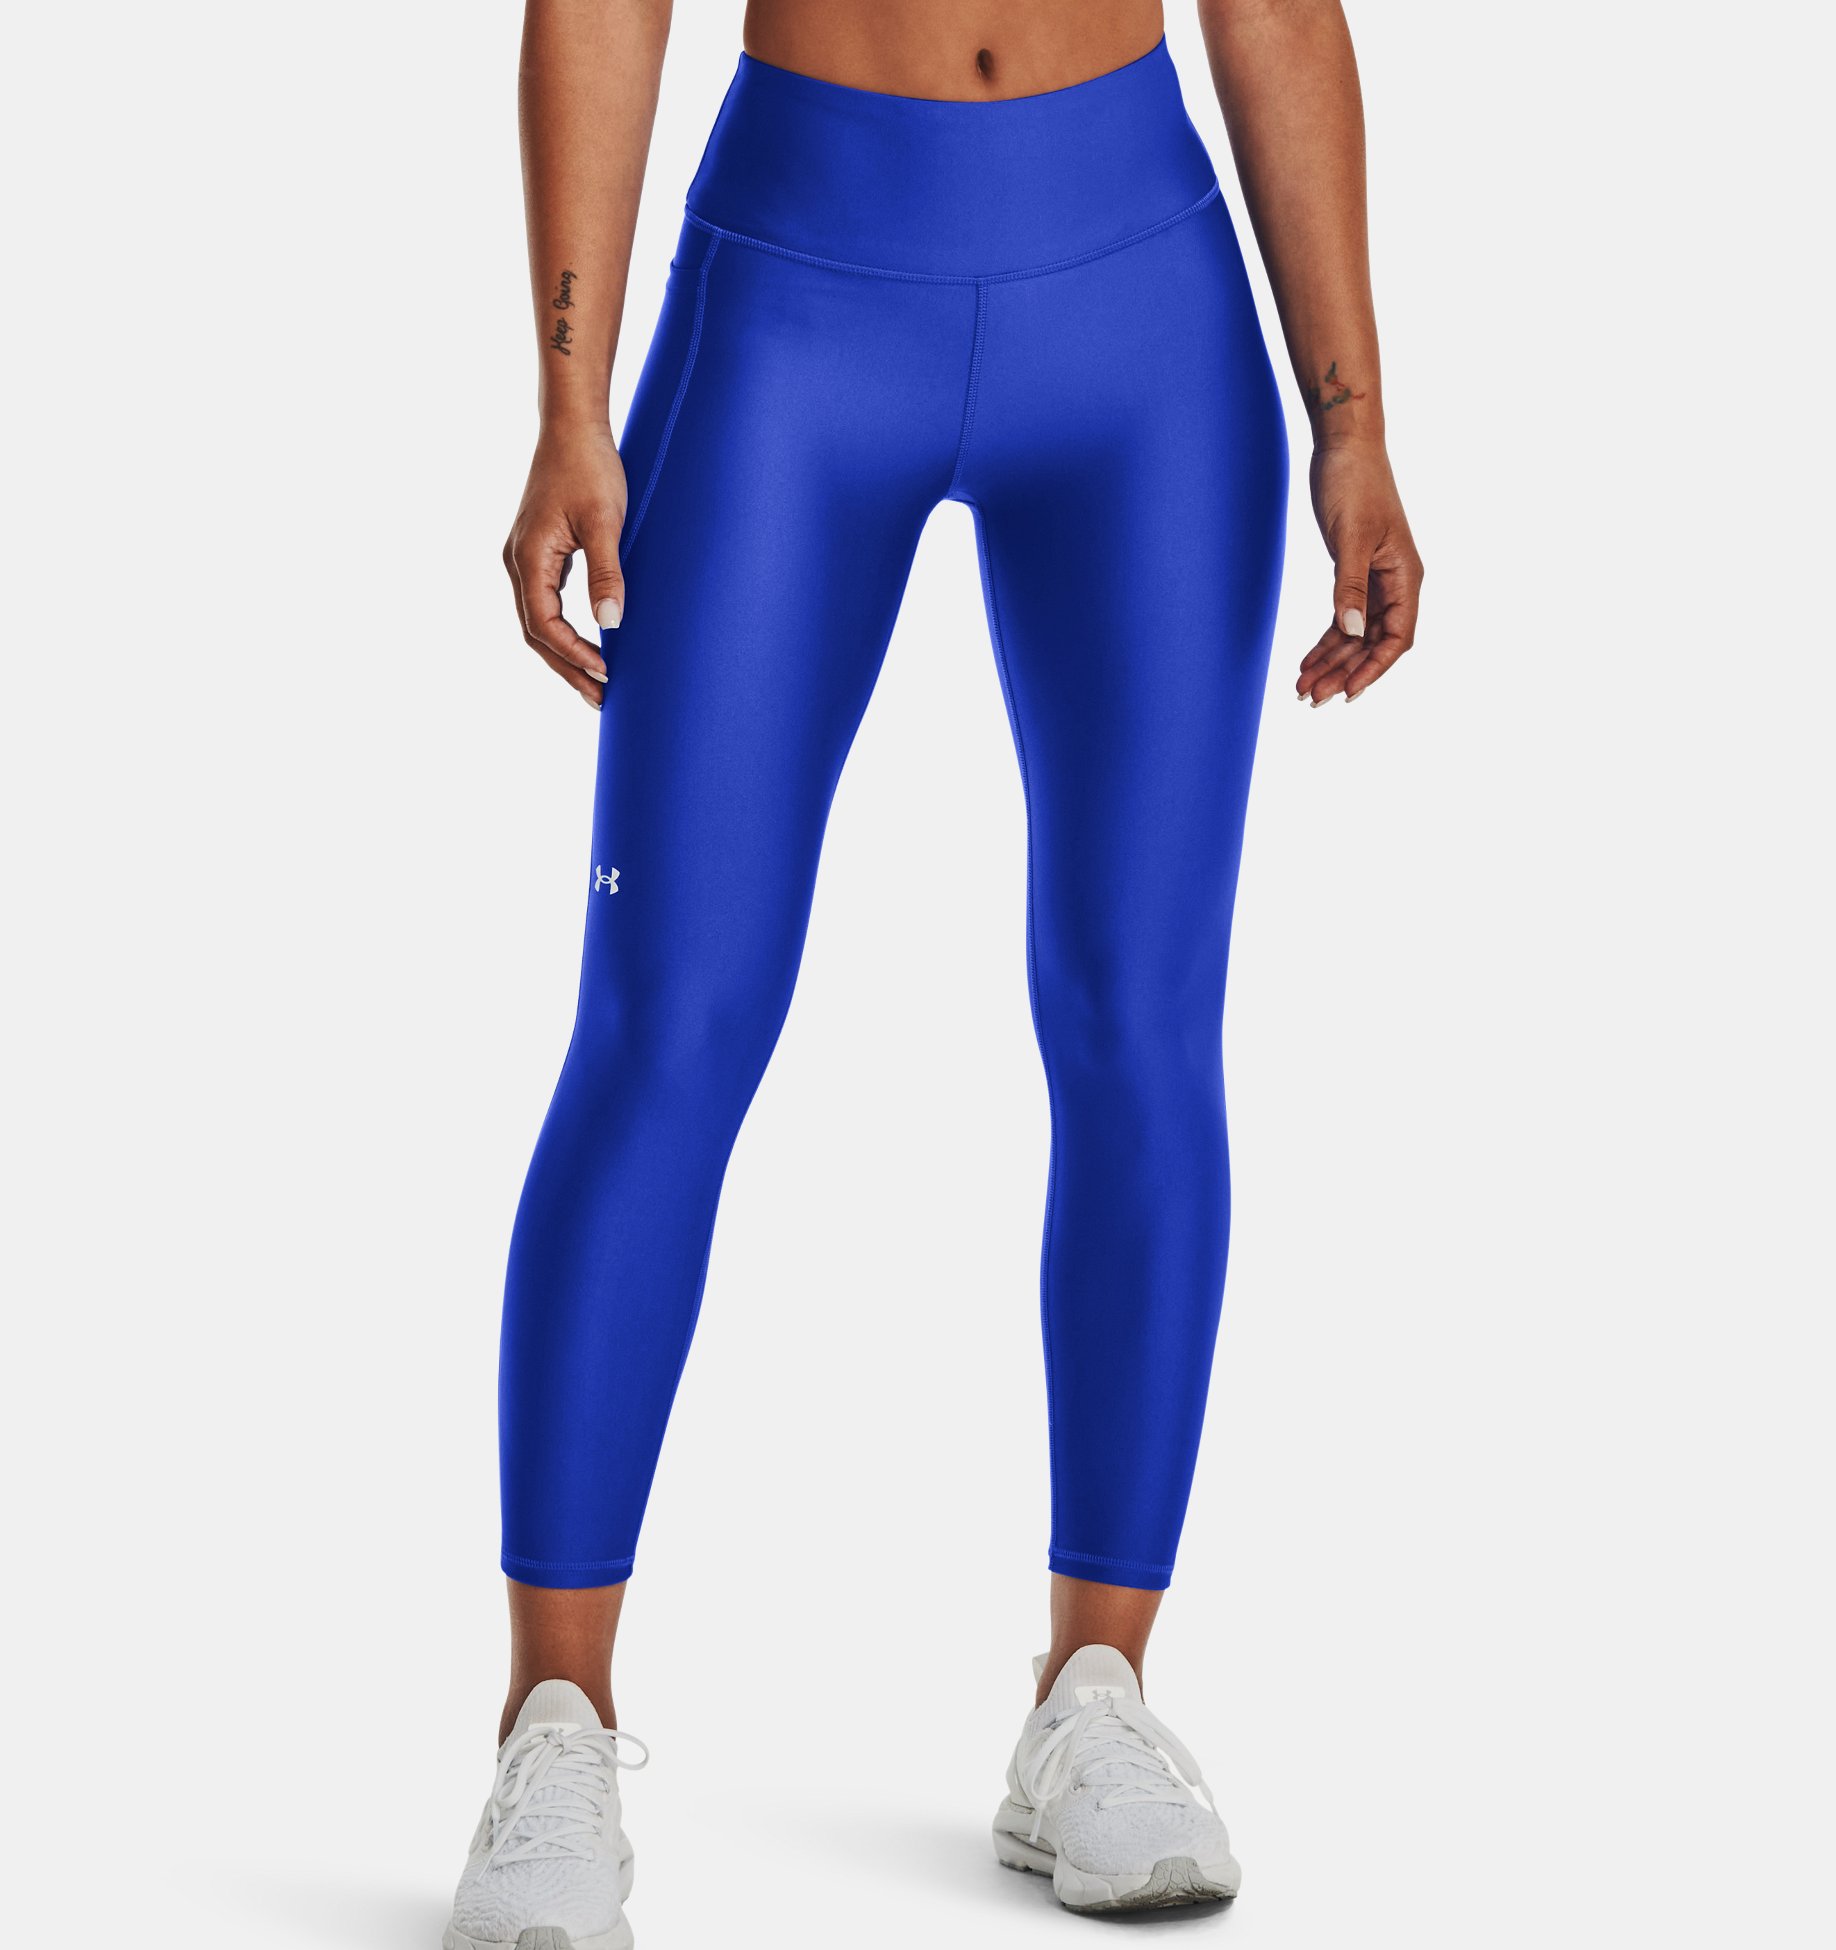 Women's Compression Tights Perfect Training And Casual Pants Leggings Lycra 